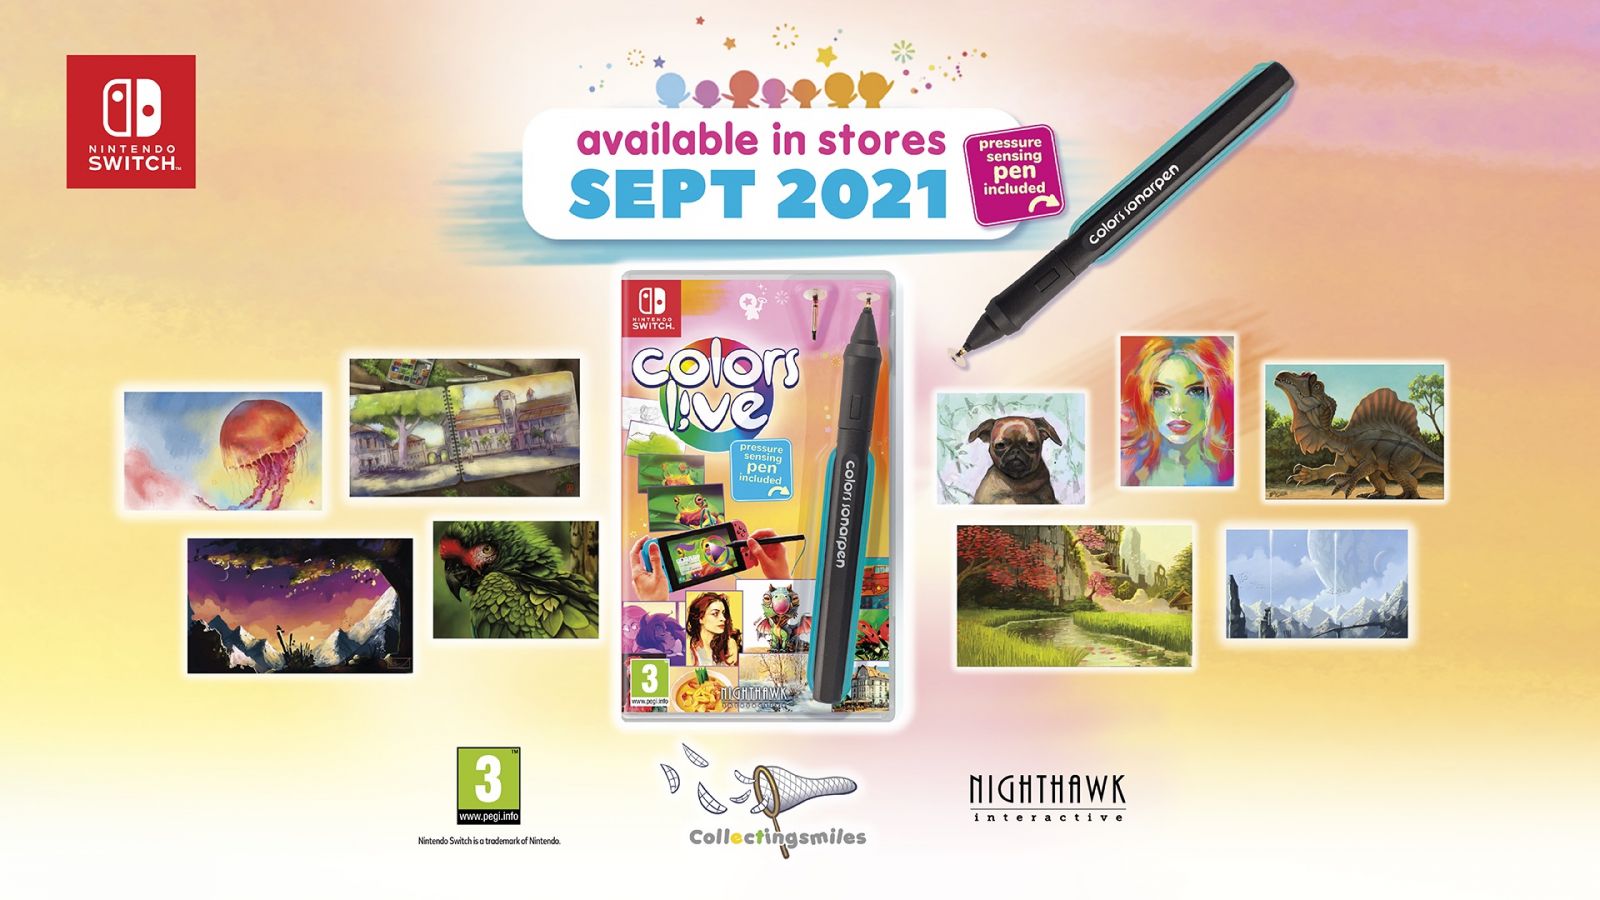 Colors Live (With Pen) (Nintendo Switch)